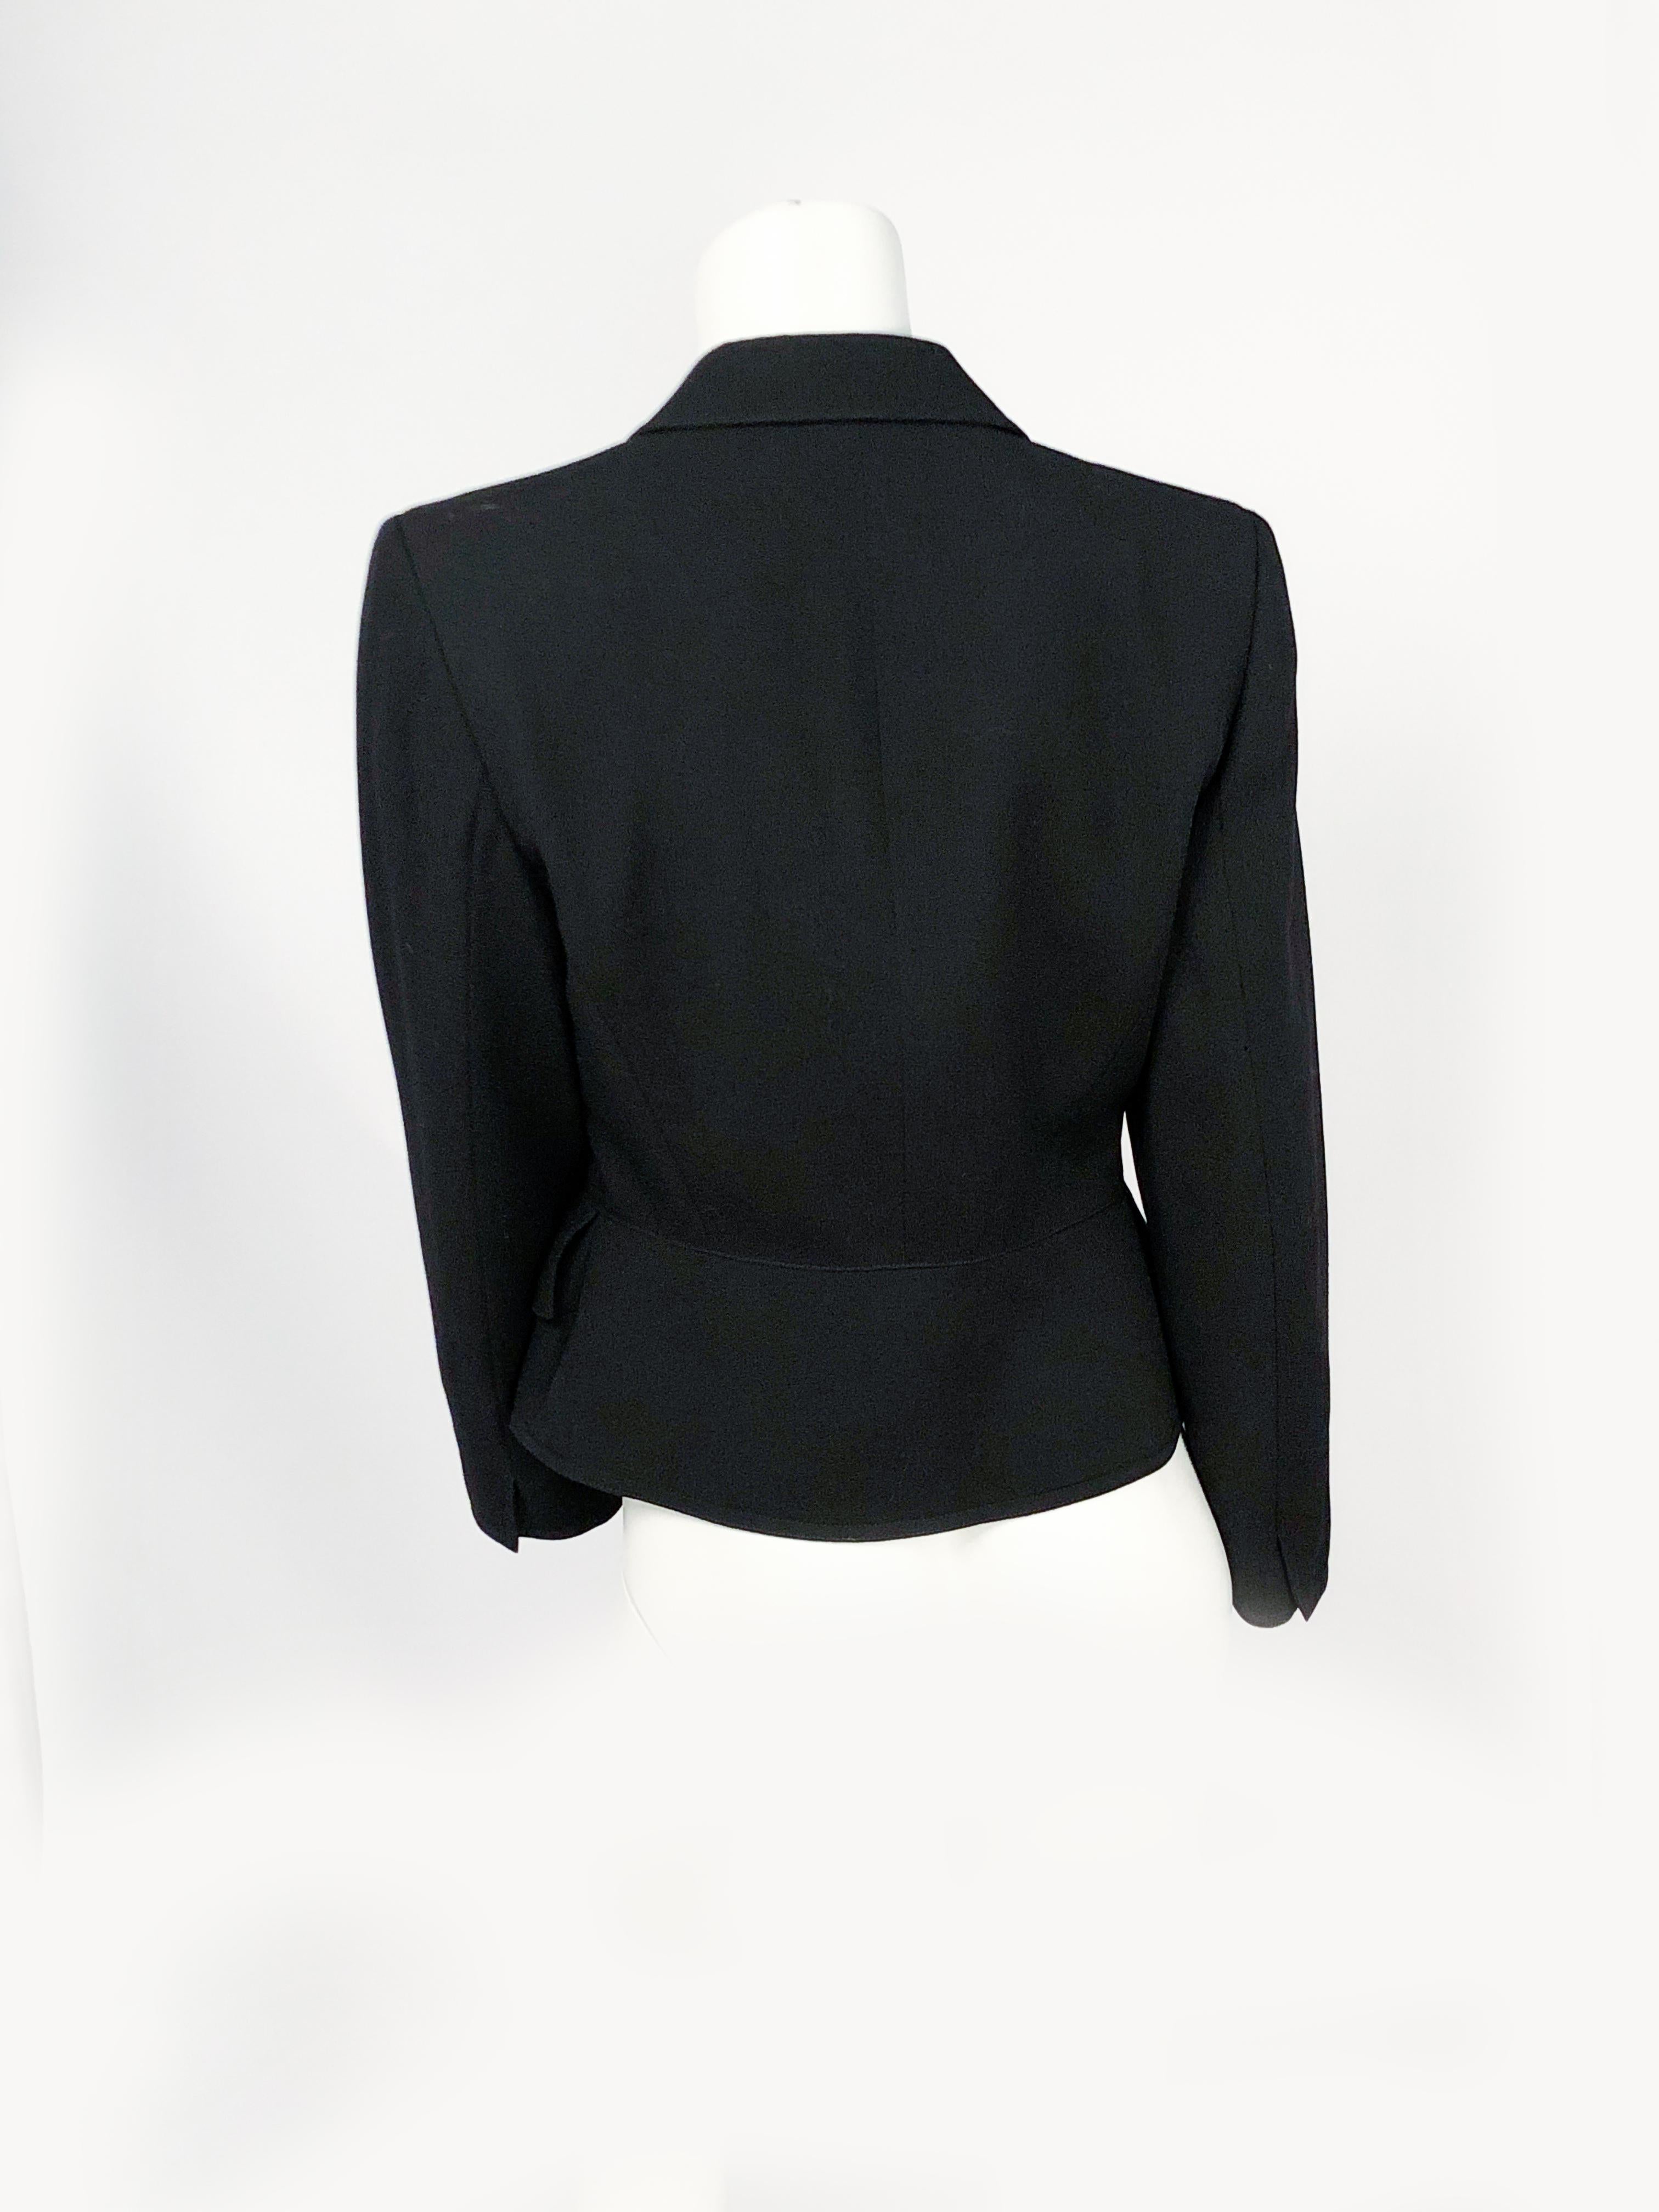 1990s Valentino Black Jacket with Cordé Flower Closure For Sale 1